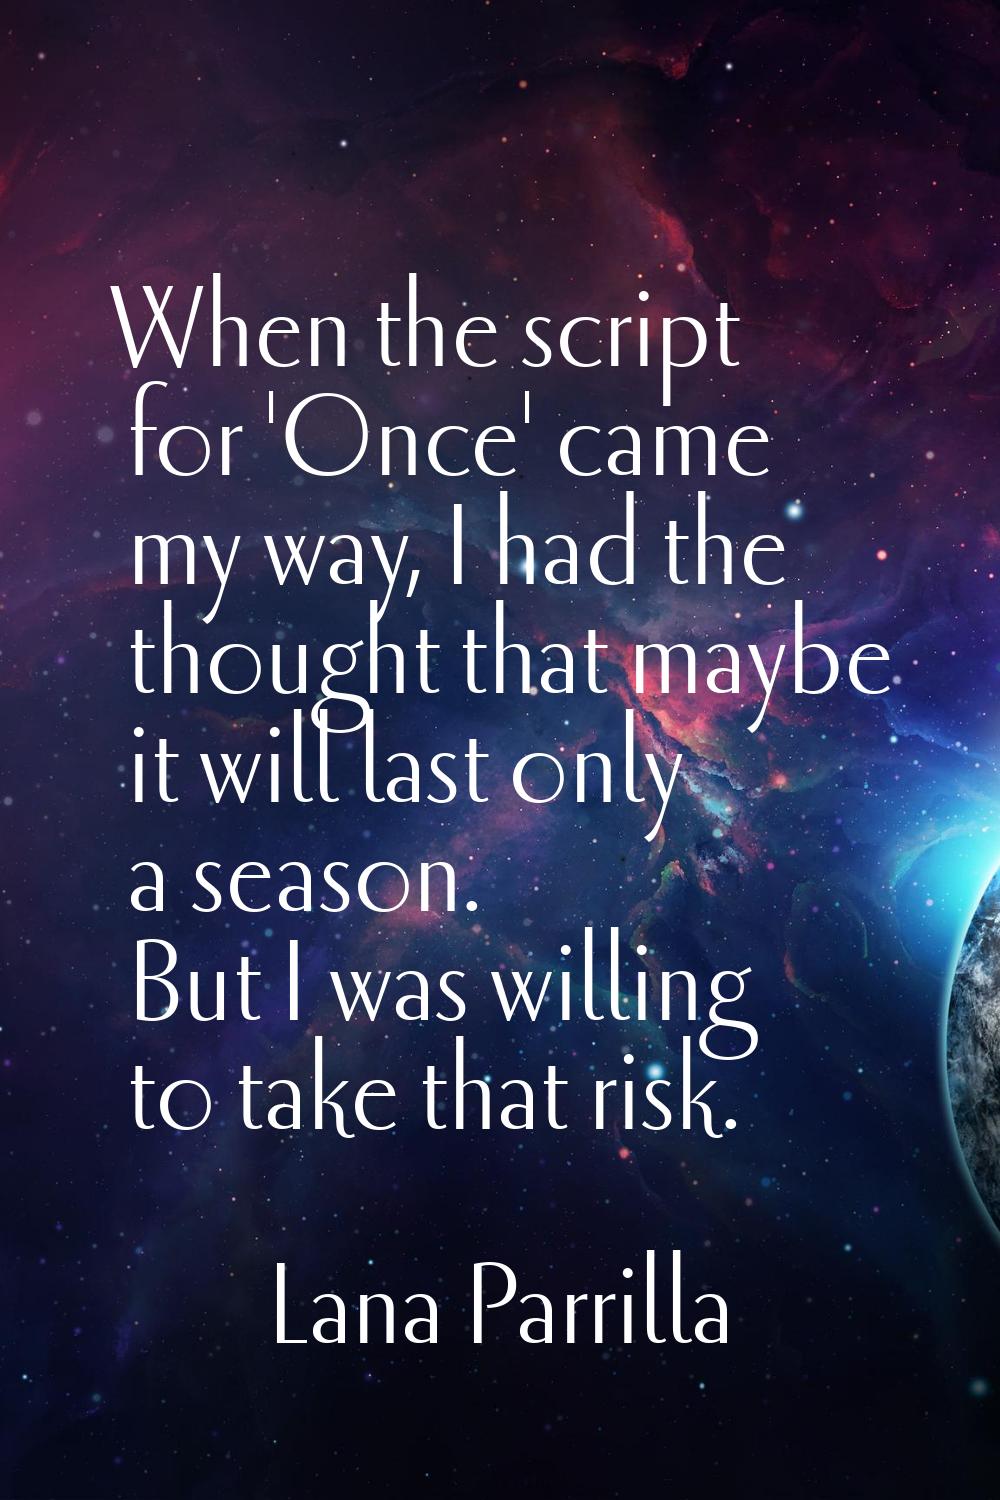 When the script for 'Once' came my way, I had the thought that maybe it will last only a season. Bu